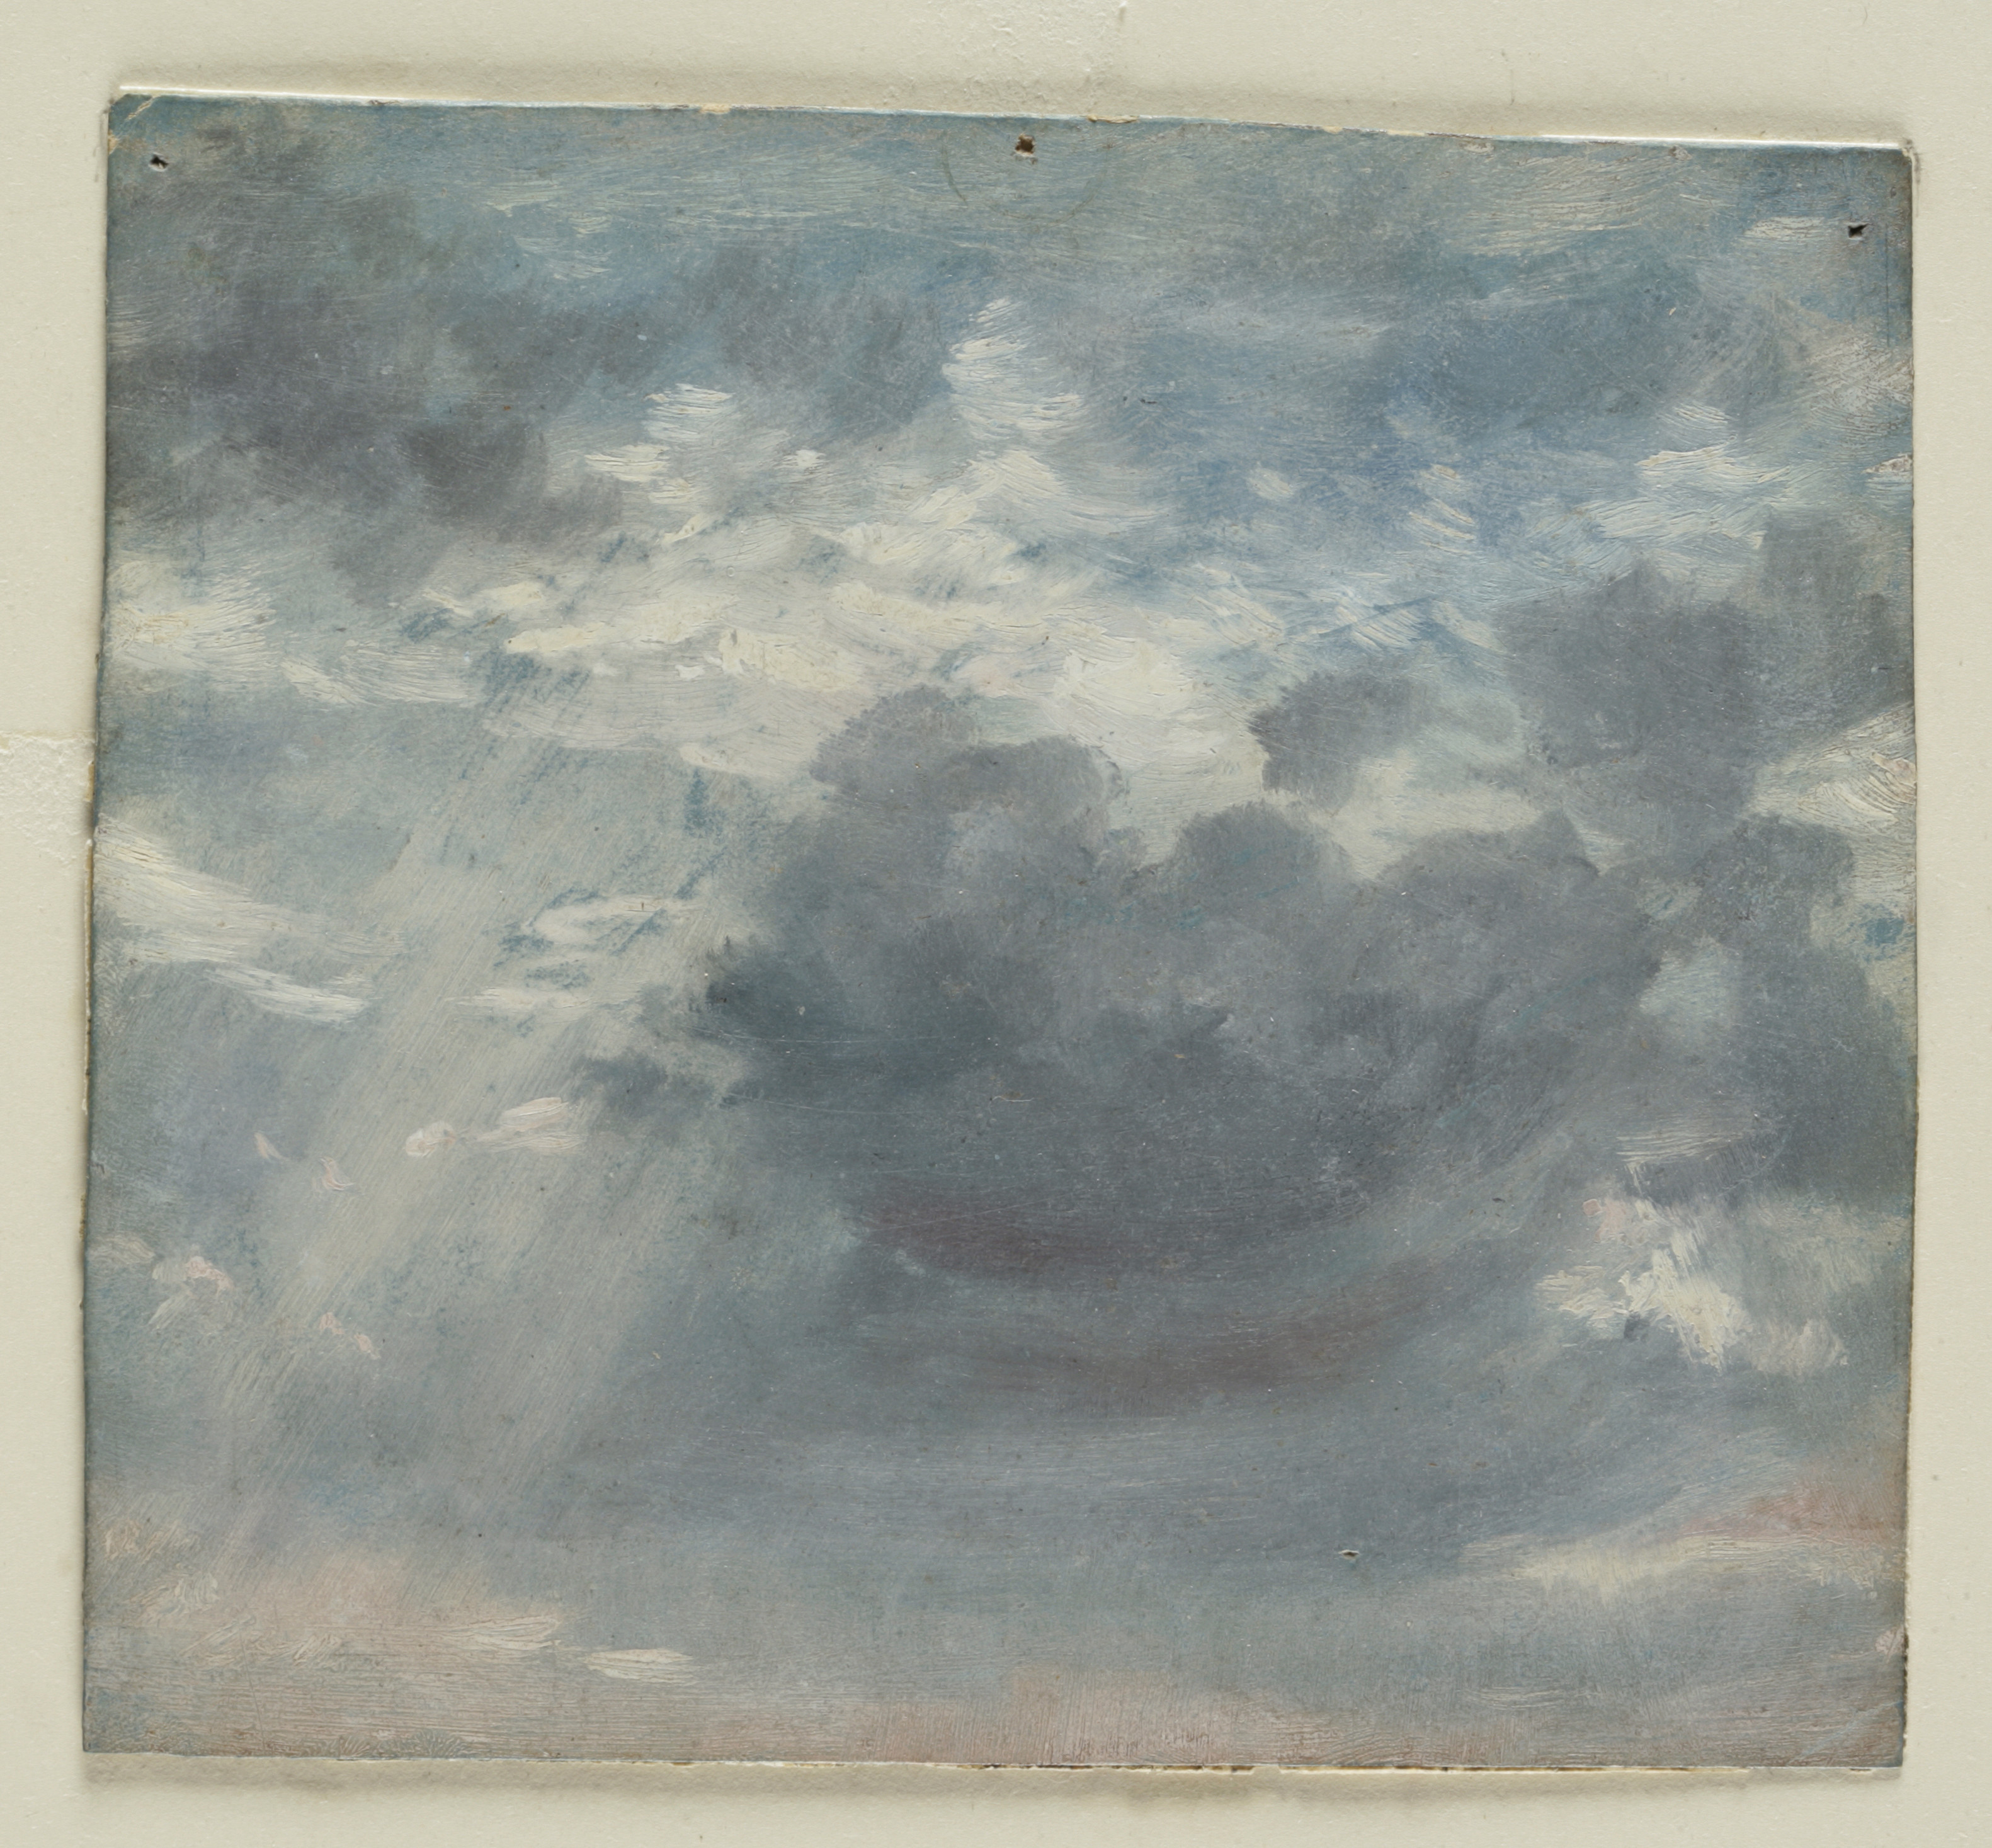 A sketch in oils on paper of a skyscape showing a shaft of sunlight emerging from behind a cloud